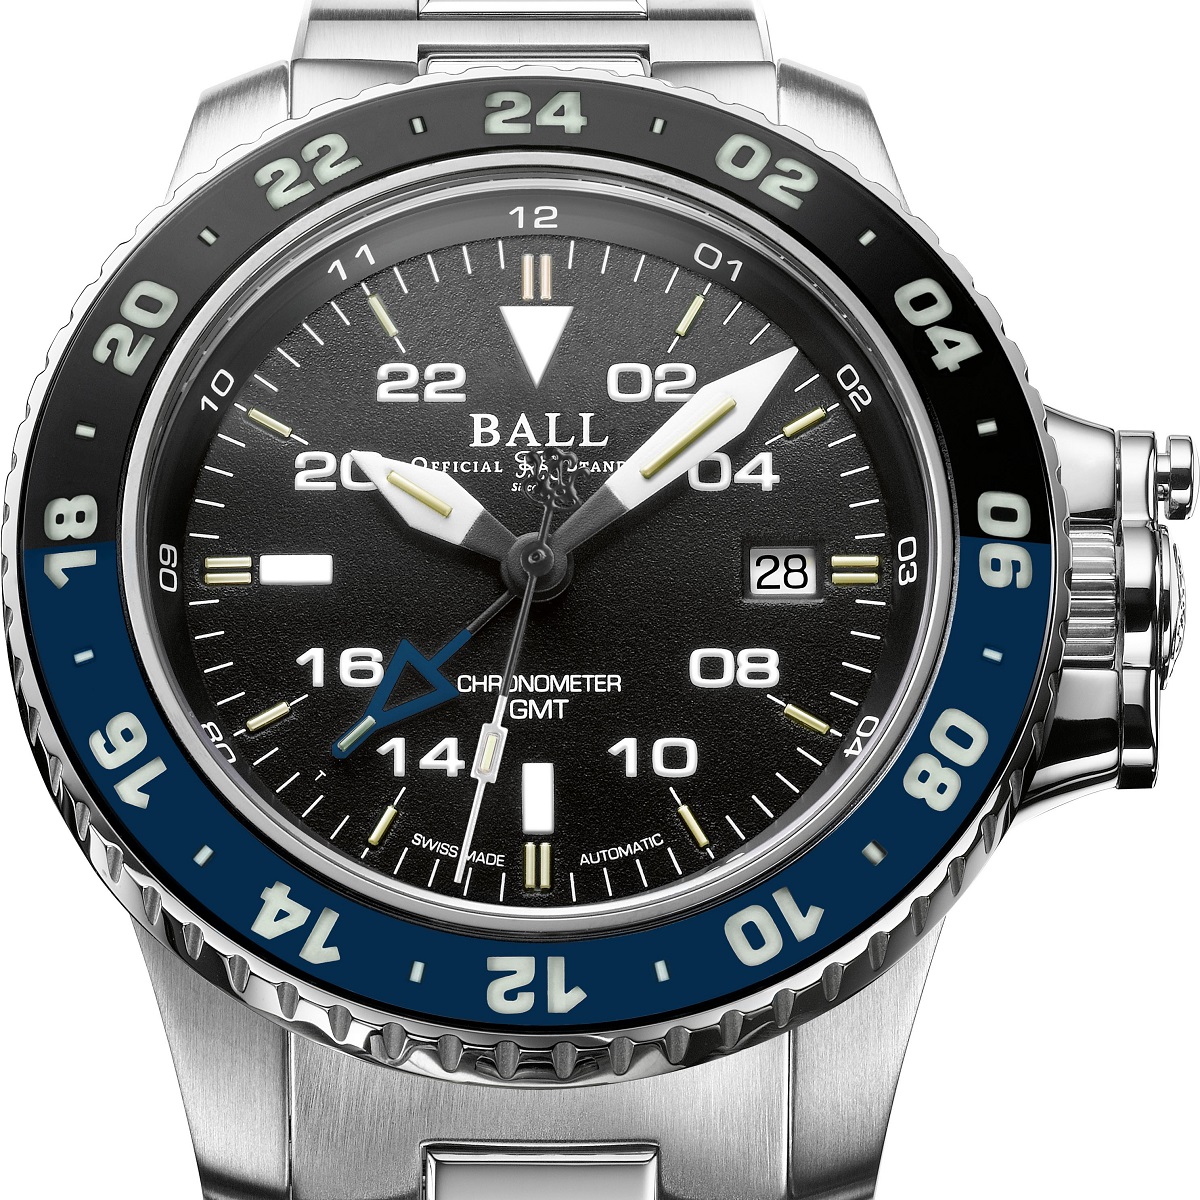 Ball Engineer Hydrocarbon AeroGMT II Wright Brothers Limited Edition Watch Review